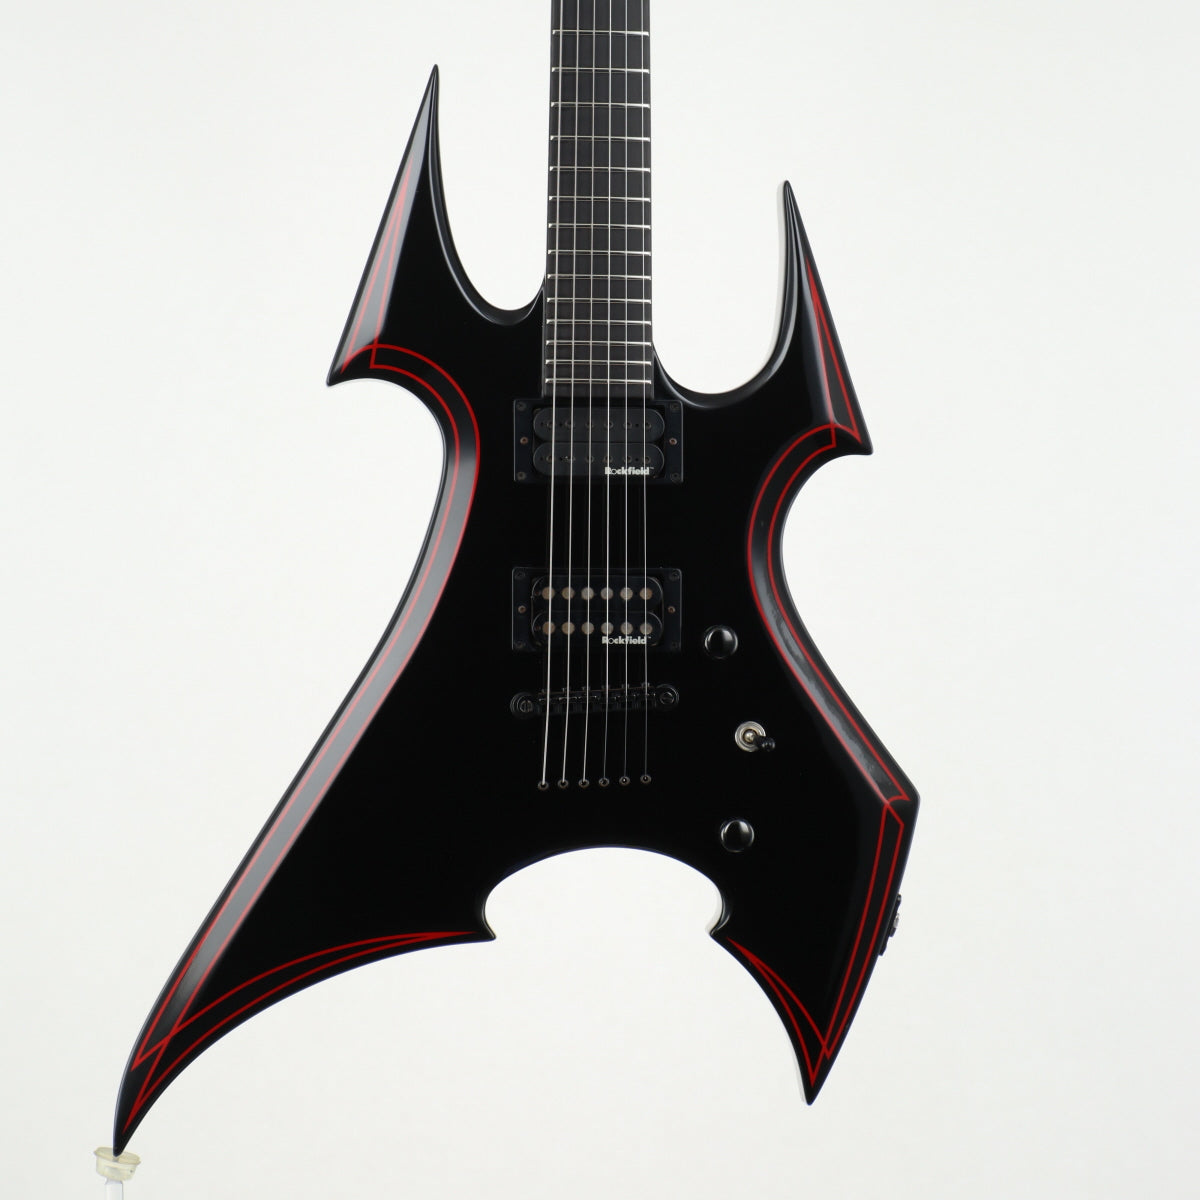 [SN E09020040] USED B.C.Rich / WMD Son of Beast onyx with red pinstripes [12]